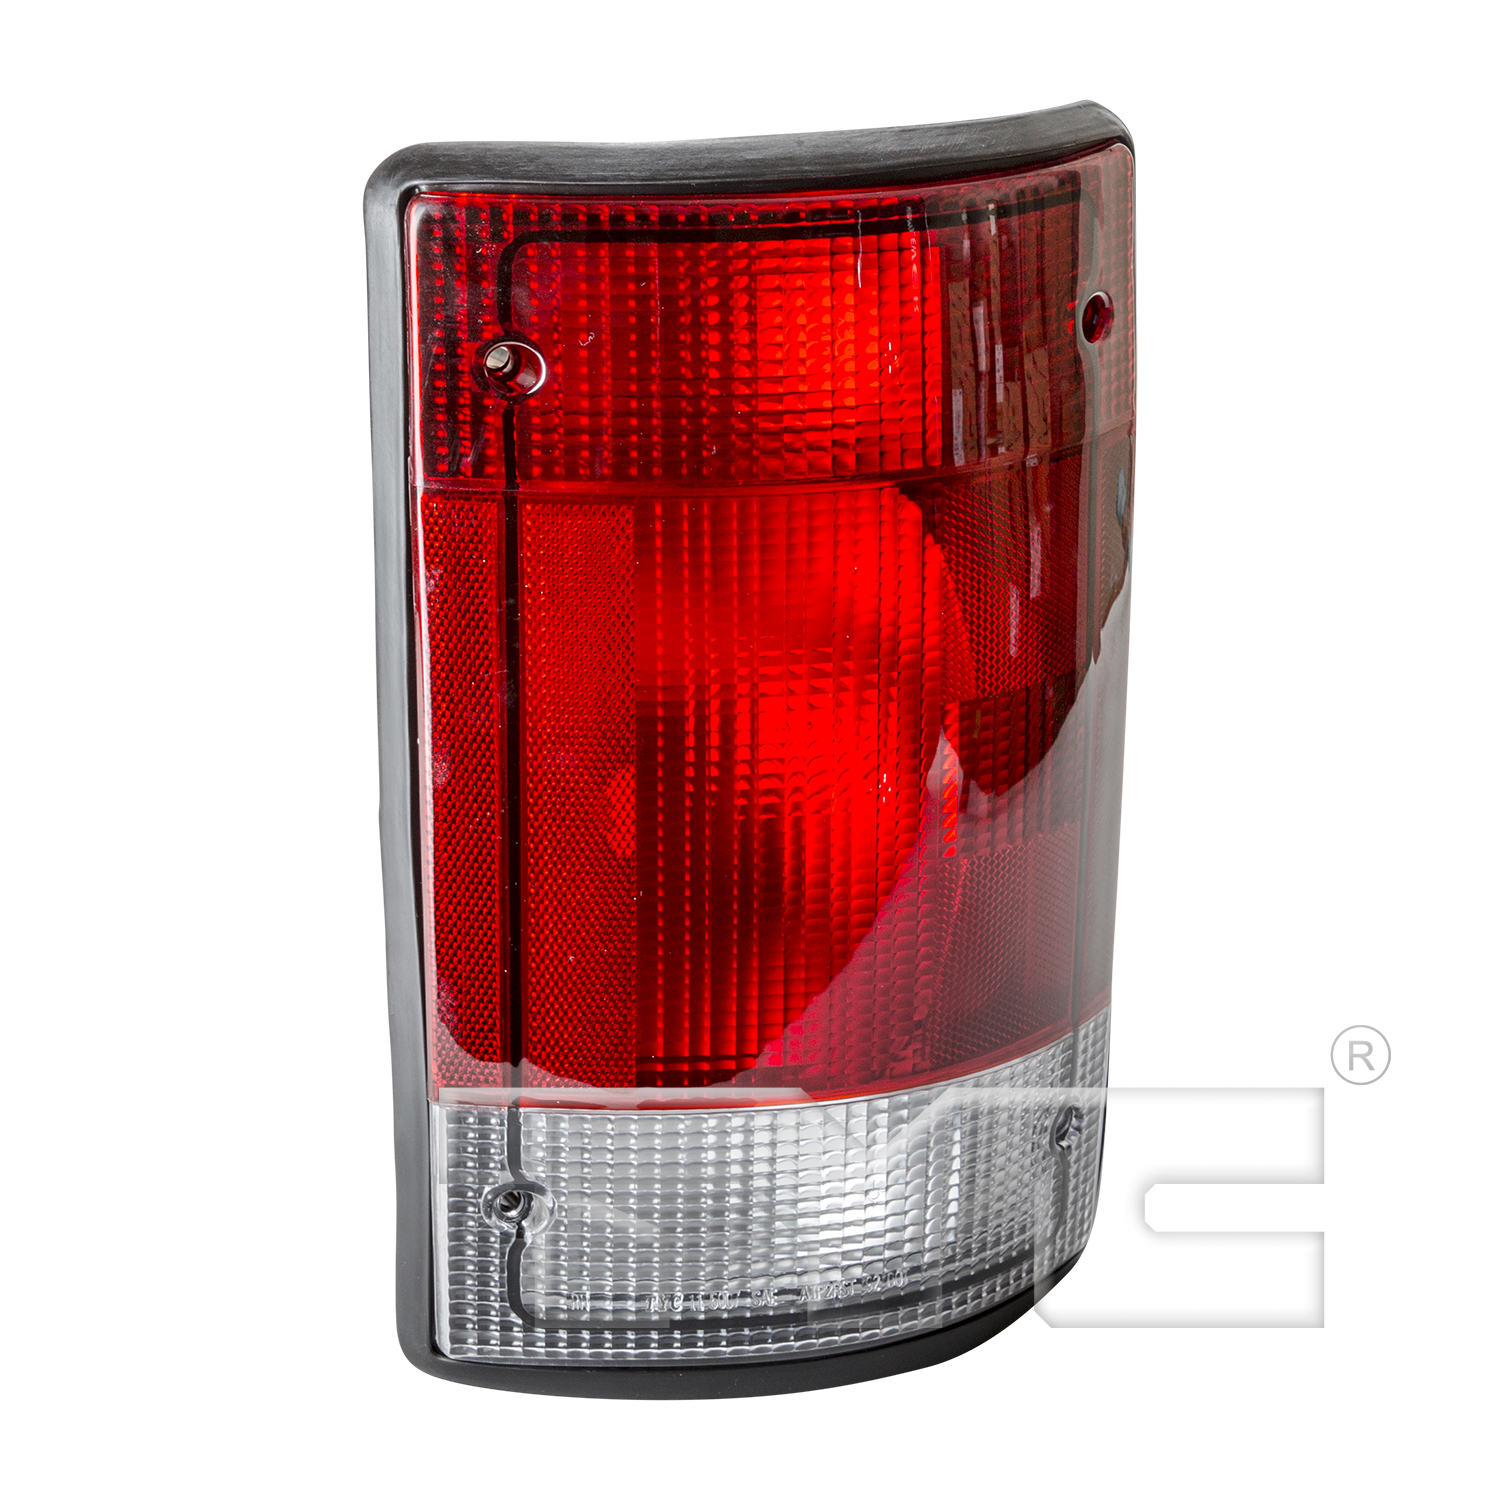 Aftermarket TAILLIGHTS for FORD - E-150 ECONOLINE CLUB WAGON, E-150 ECONOLINE CLUB WAGON,95-02,RT Taillamp assy